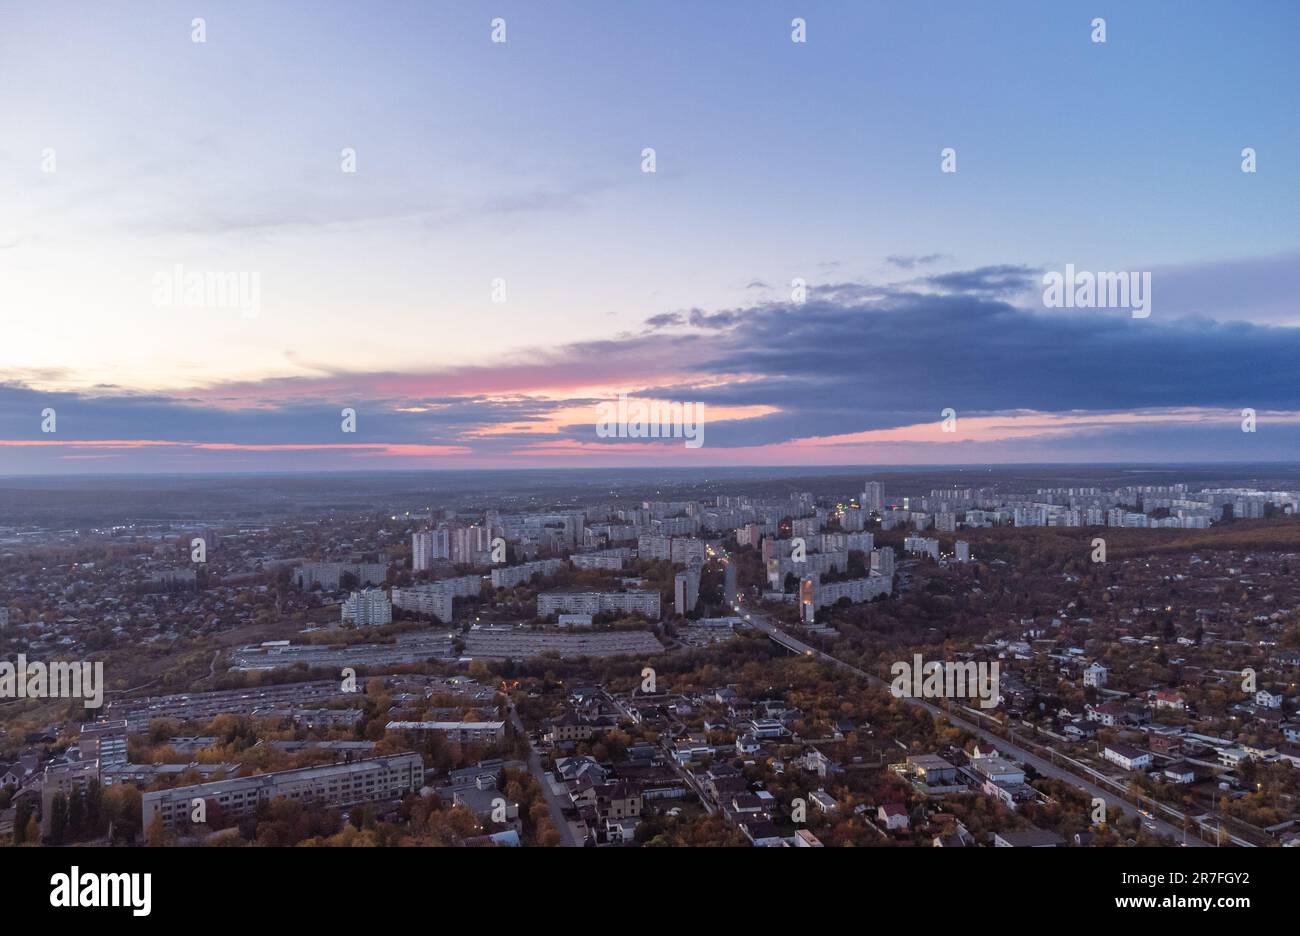 Aerial autumn purple sunset evening city view. Residential district with scenic cloudy sky. Kharkiv, Ukraine Stock Photo